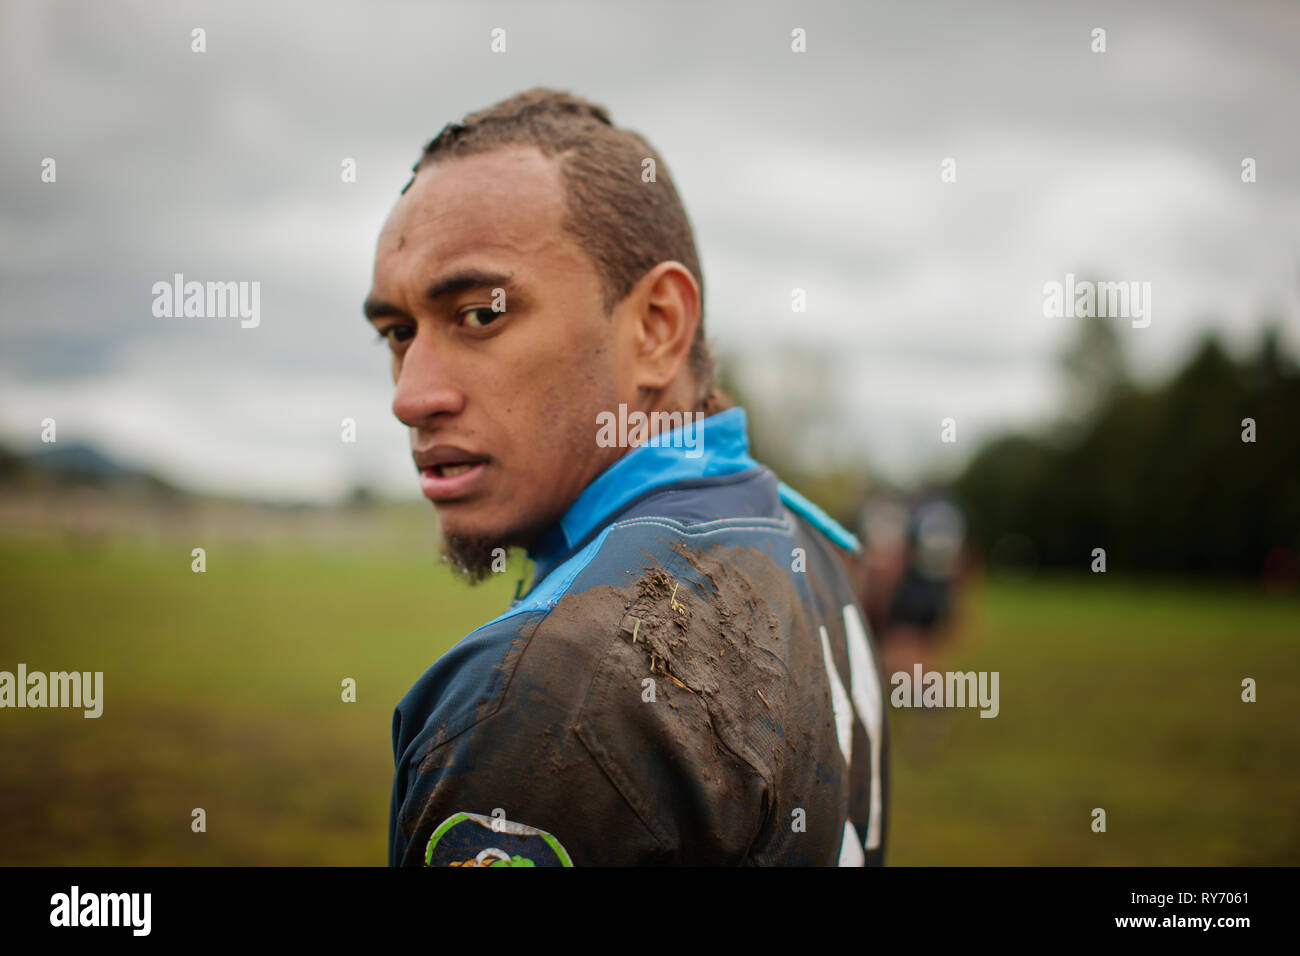 Rugby player with a worried expression. Stock Photo